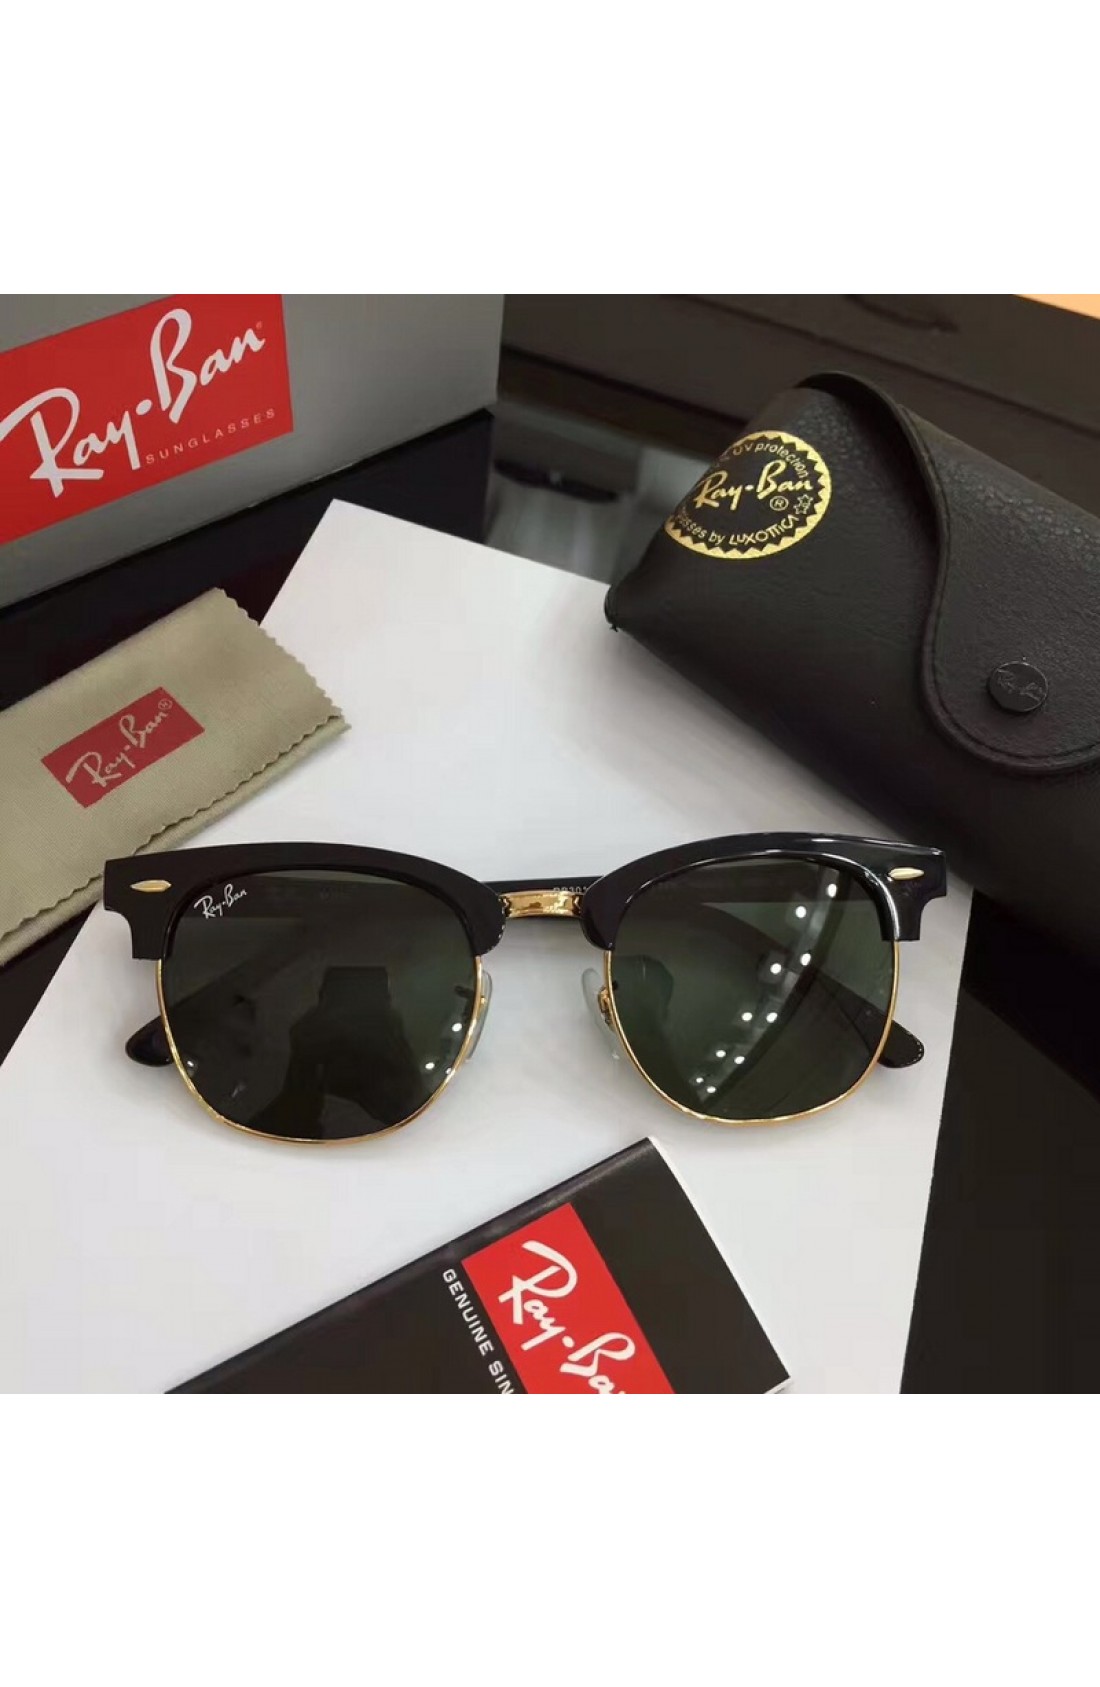 ray bans on sale womens